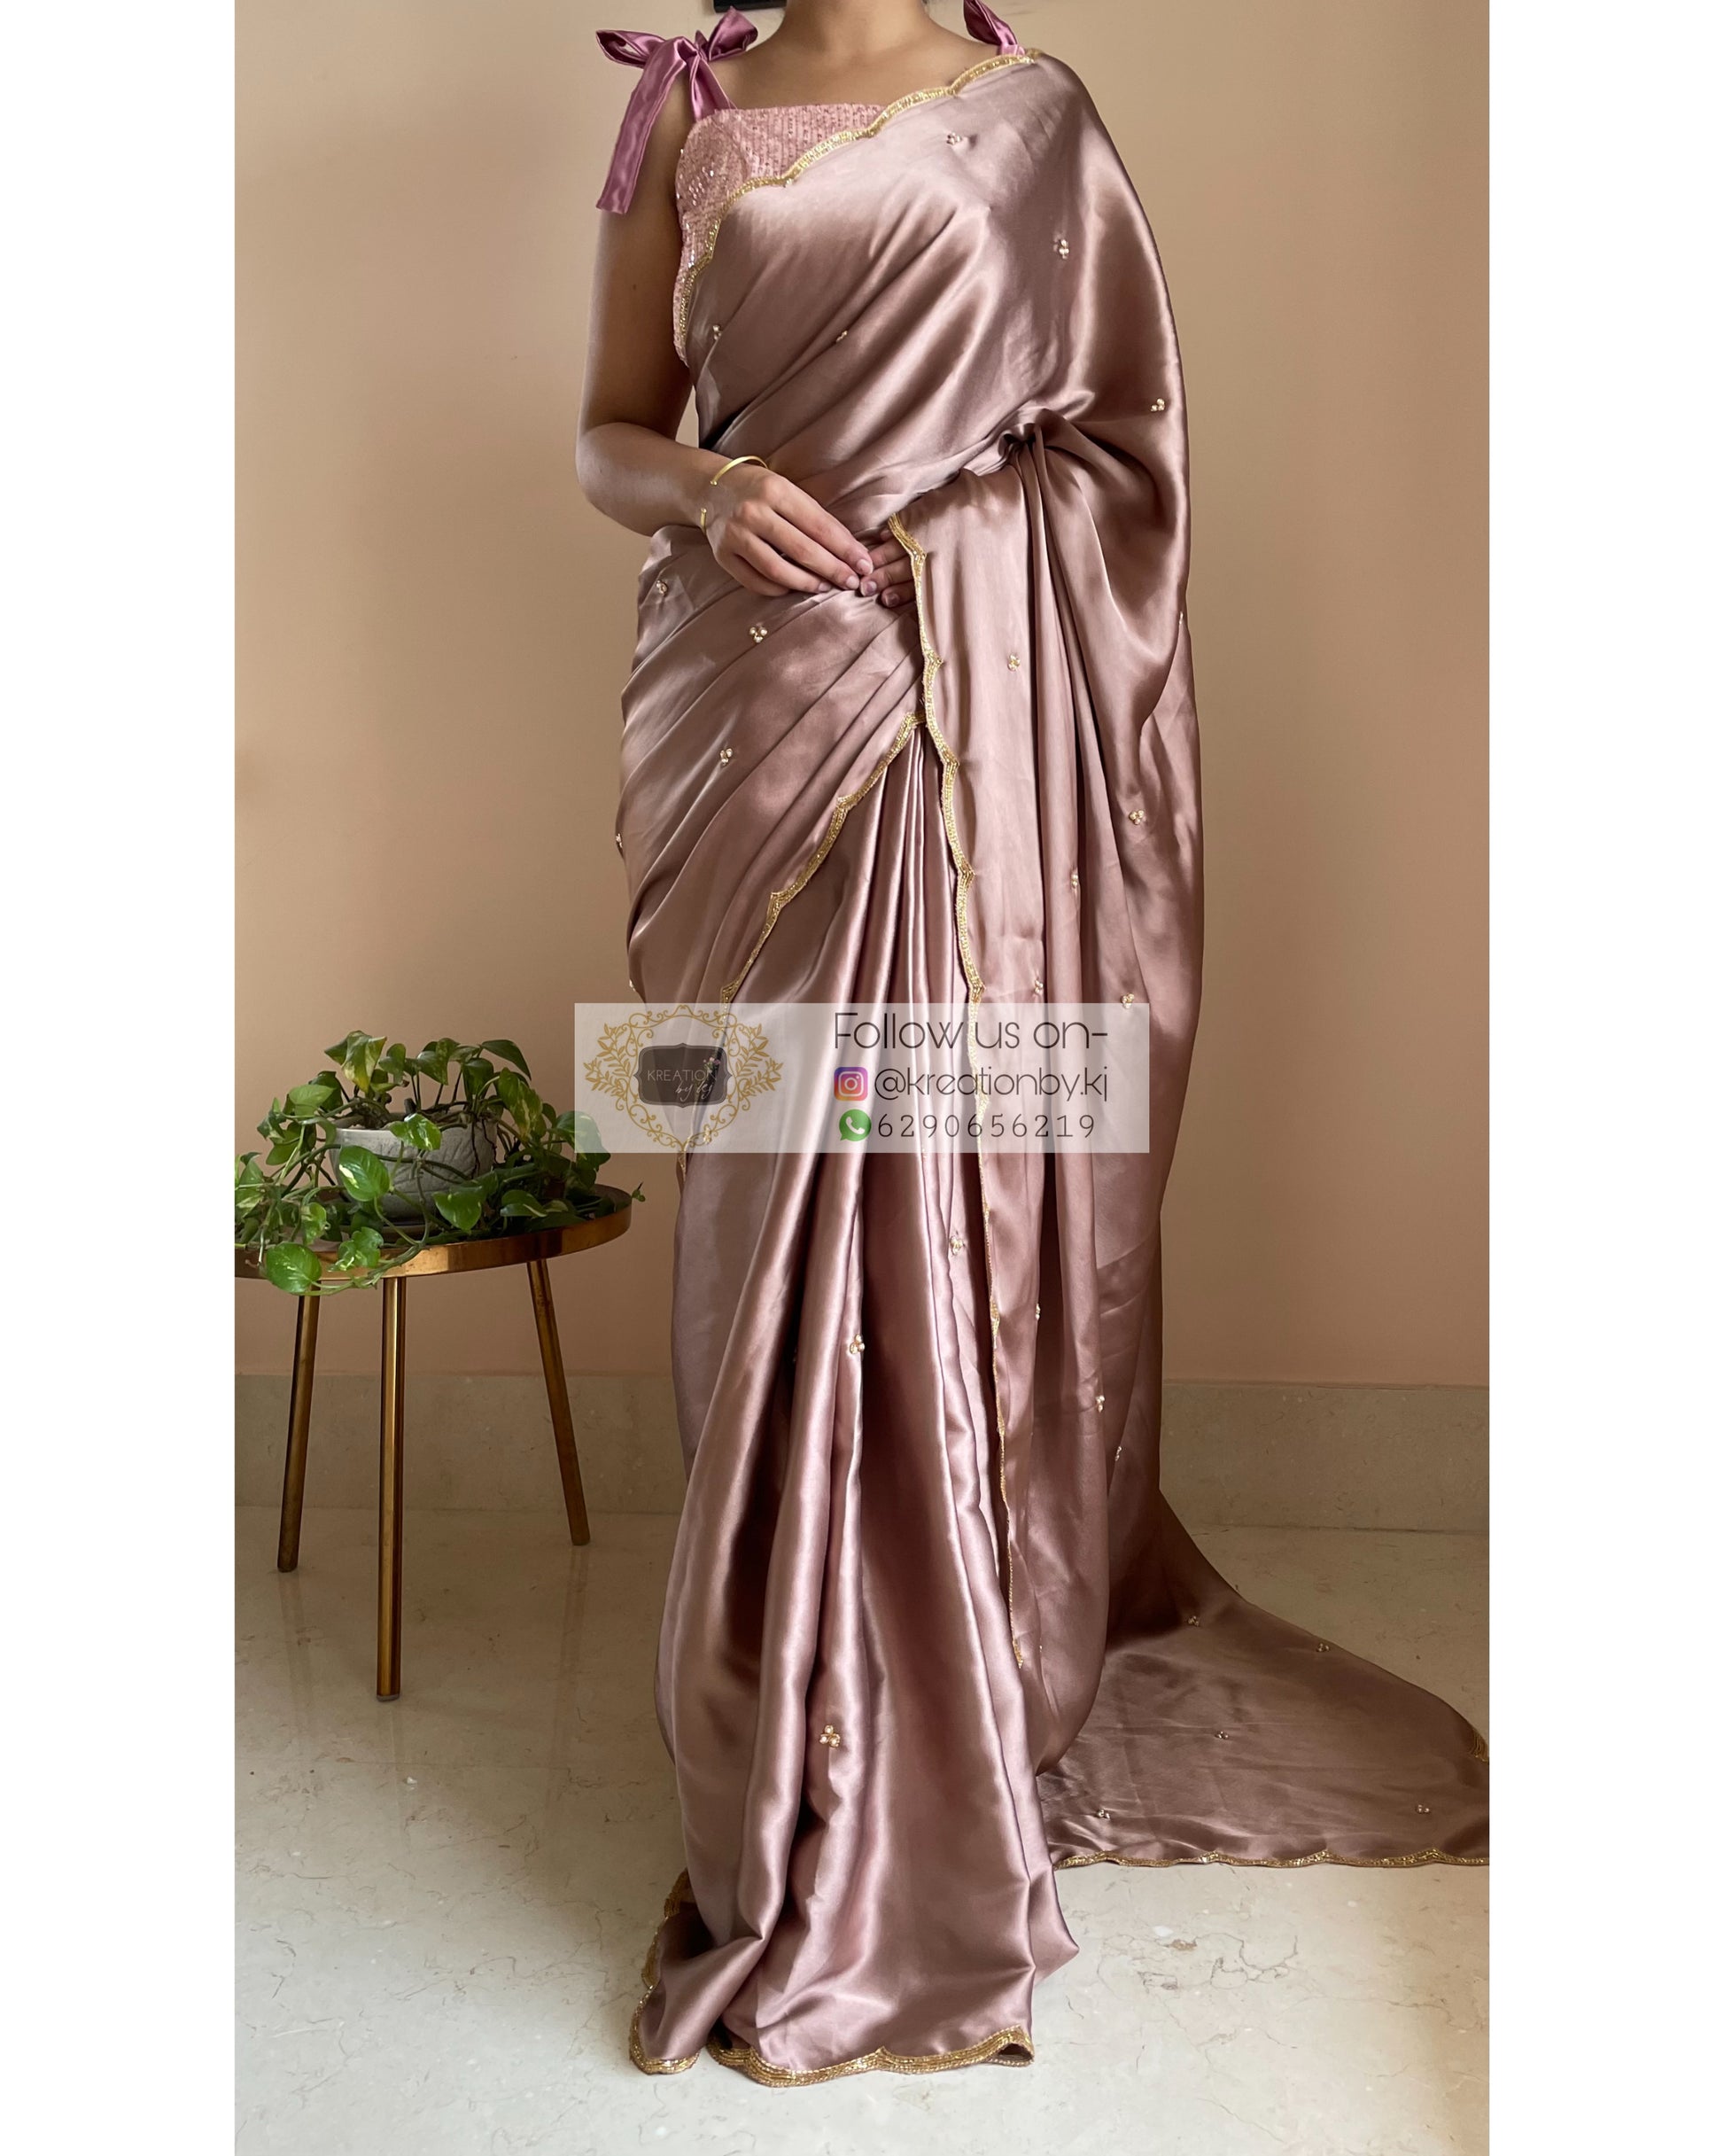 Lilac Satin Silk Saree With Handembroidered Scalloping - kreationbykj